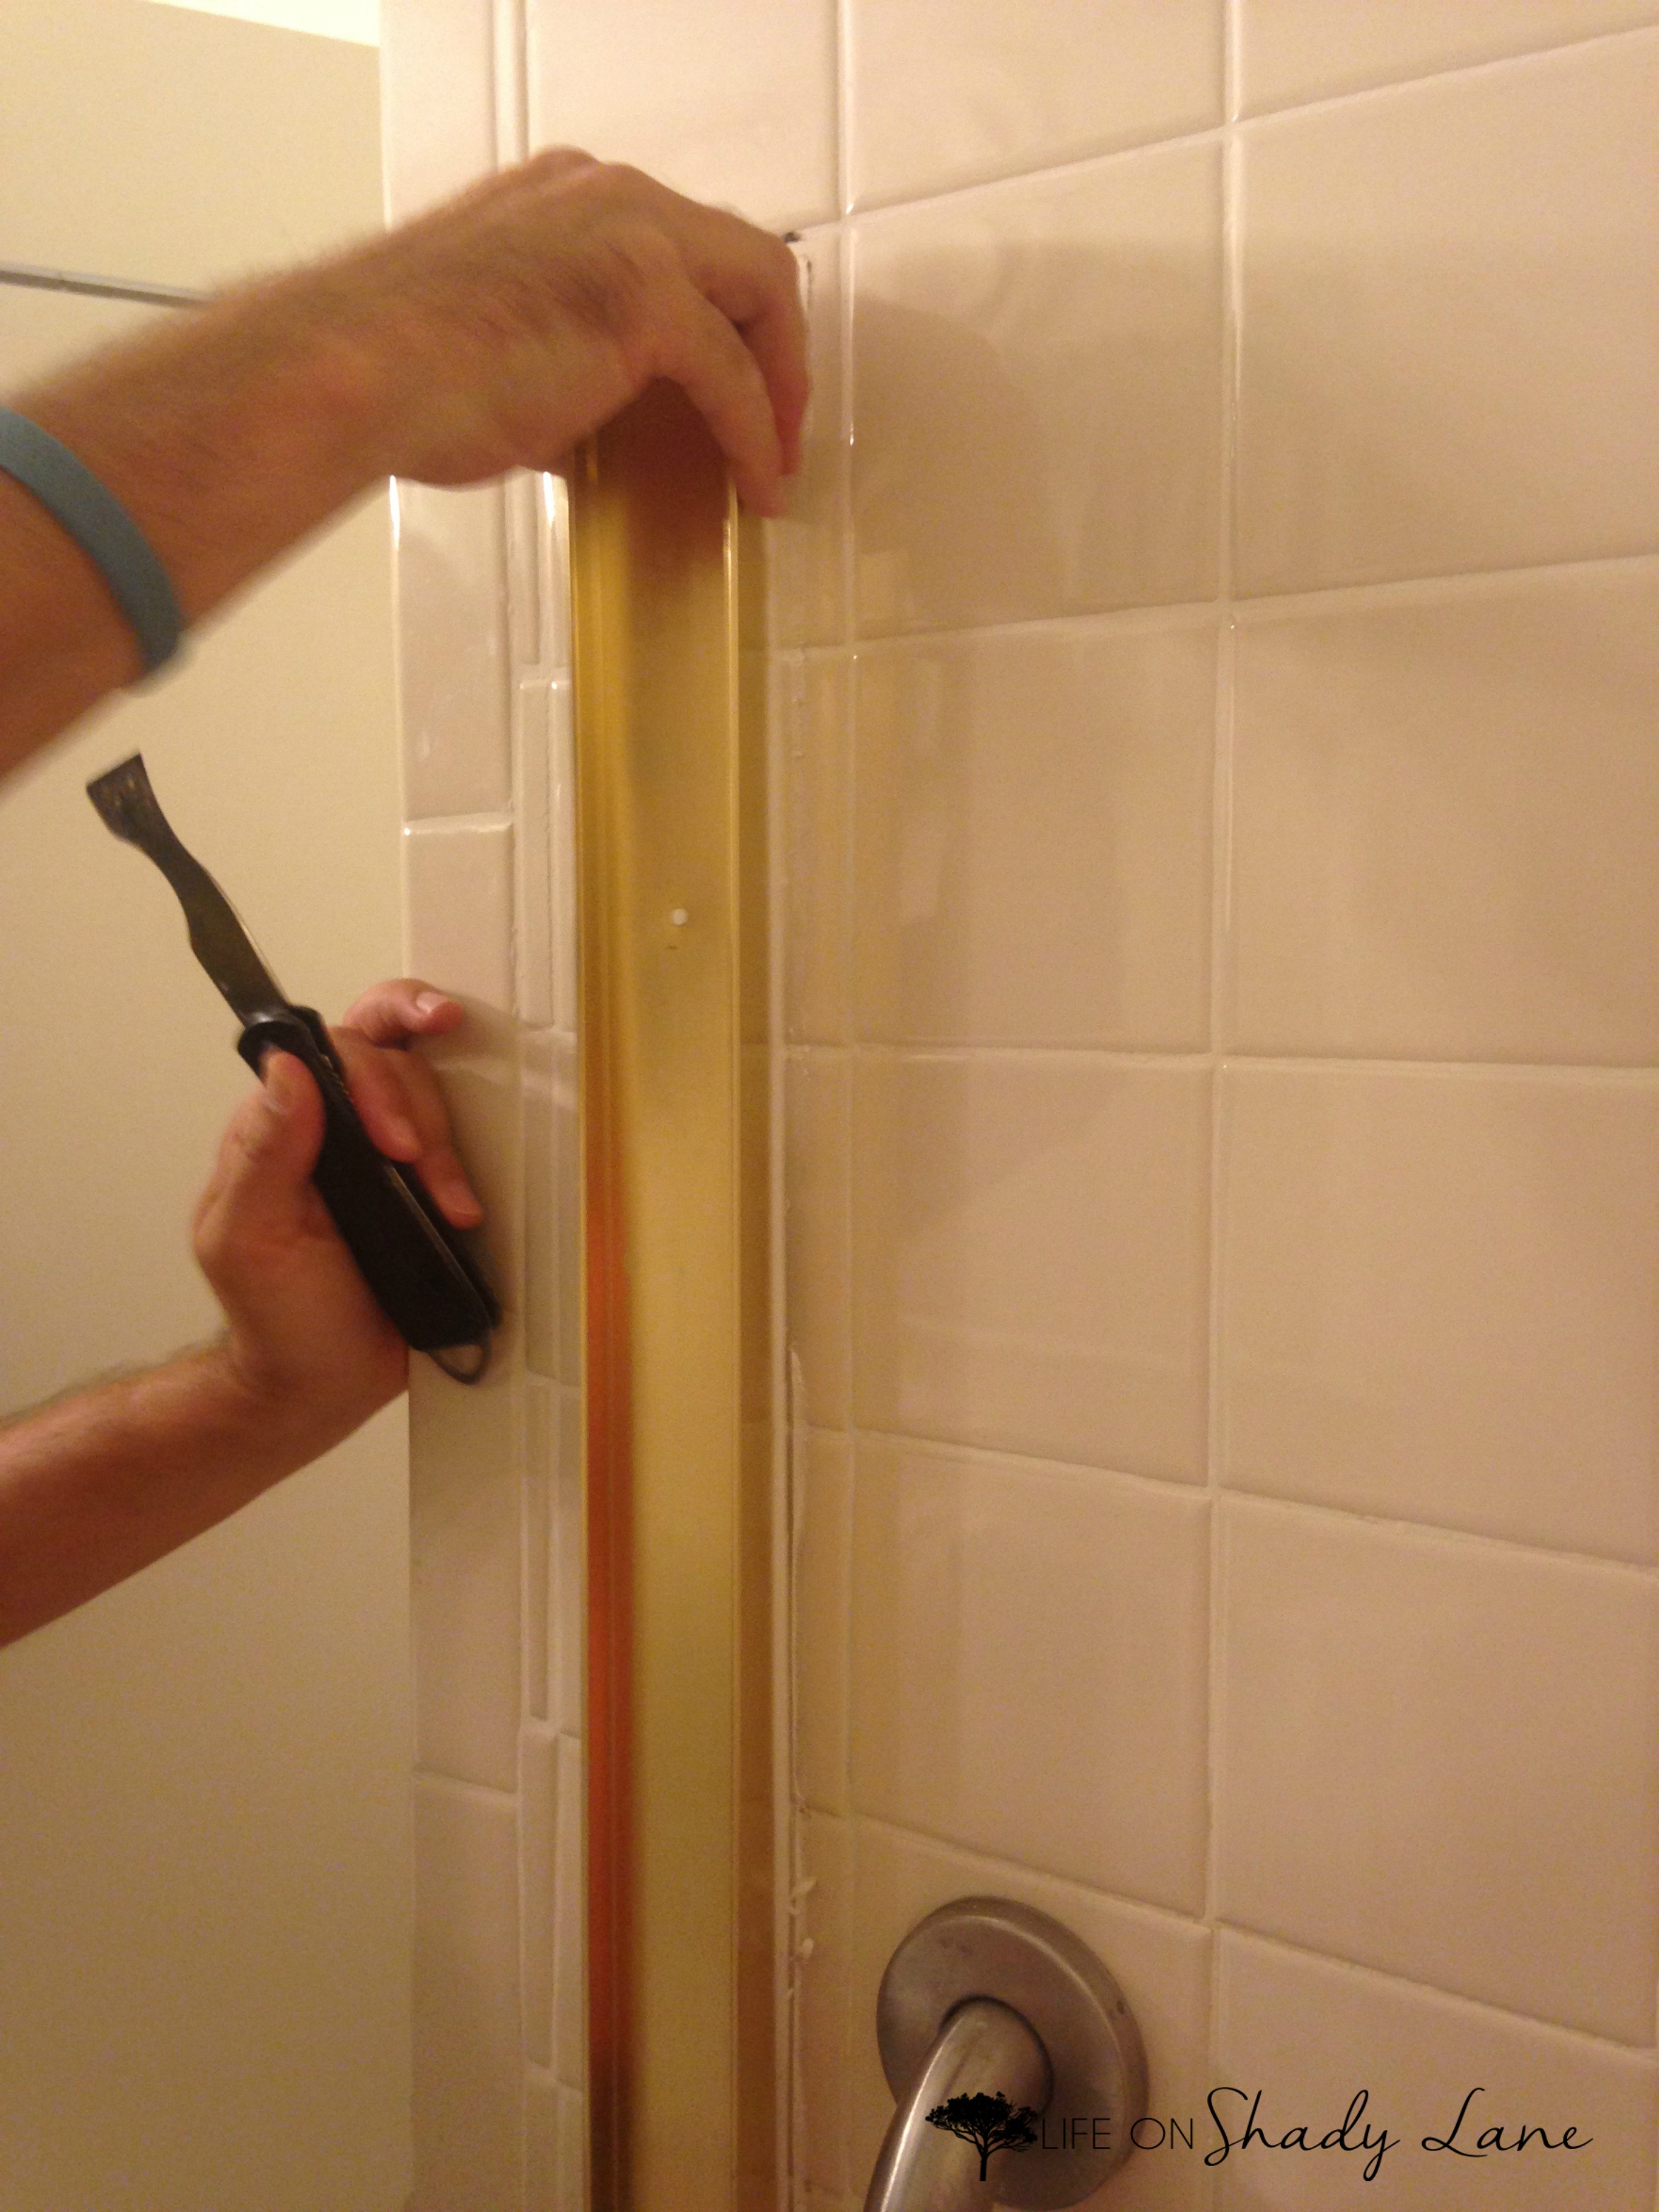 How to Remove Sliding Shower Doors | Life on Shady Lane How To Clean Up Shattered Shower Door